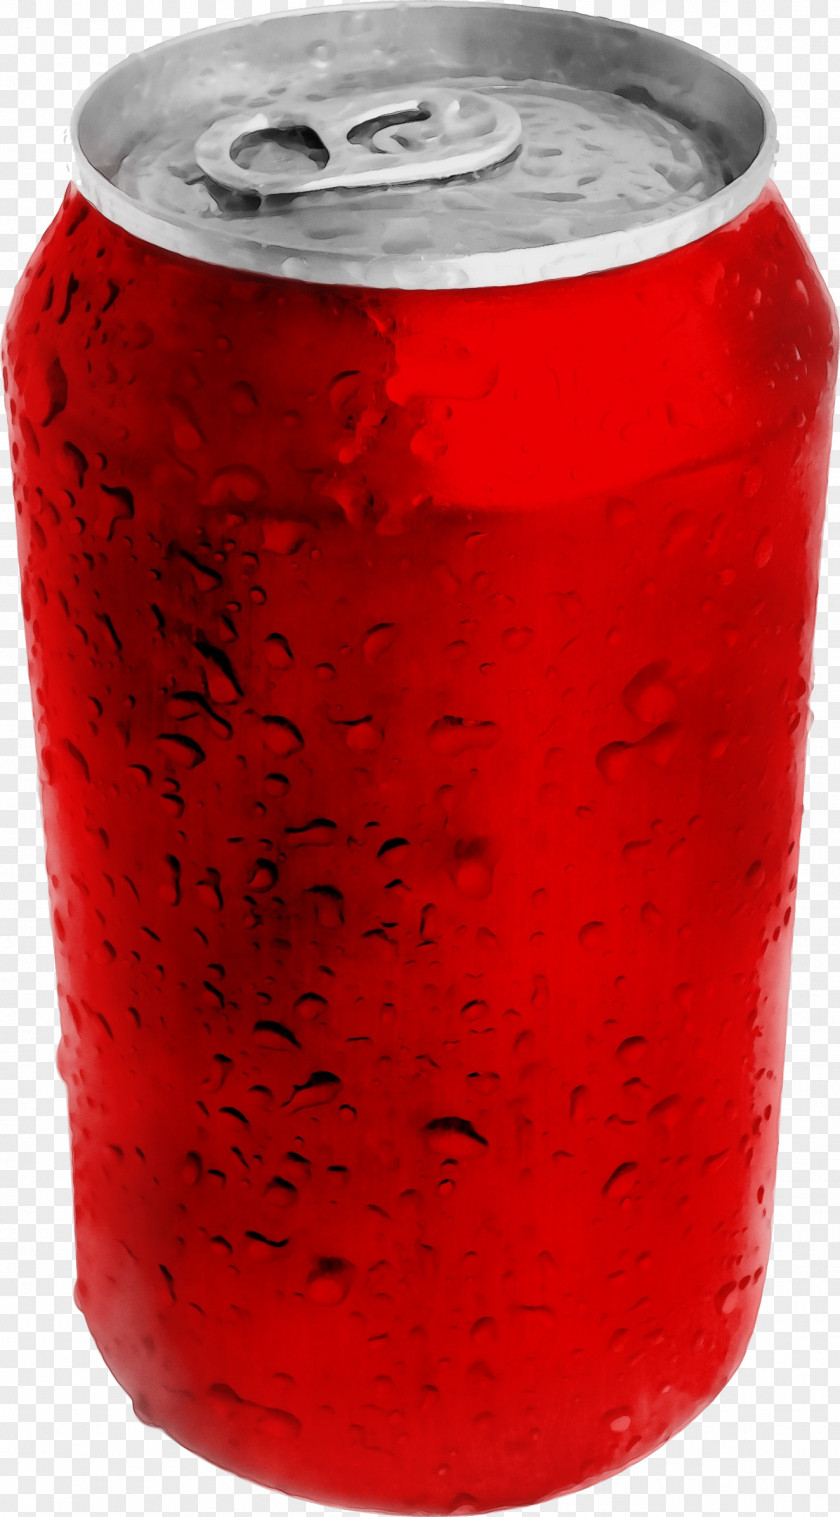 Tin Can Highball Glass Beverage Red Drink Cranberry Juice Non-alcoholic PNG